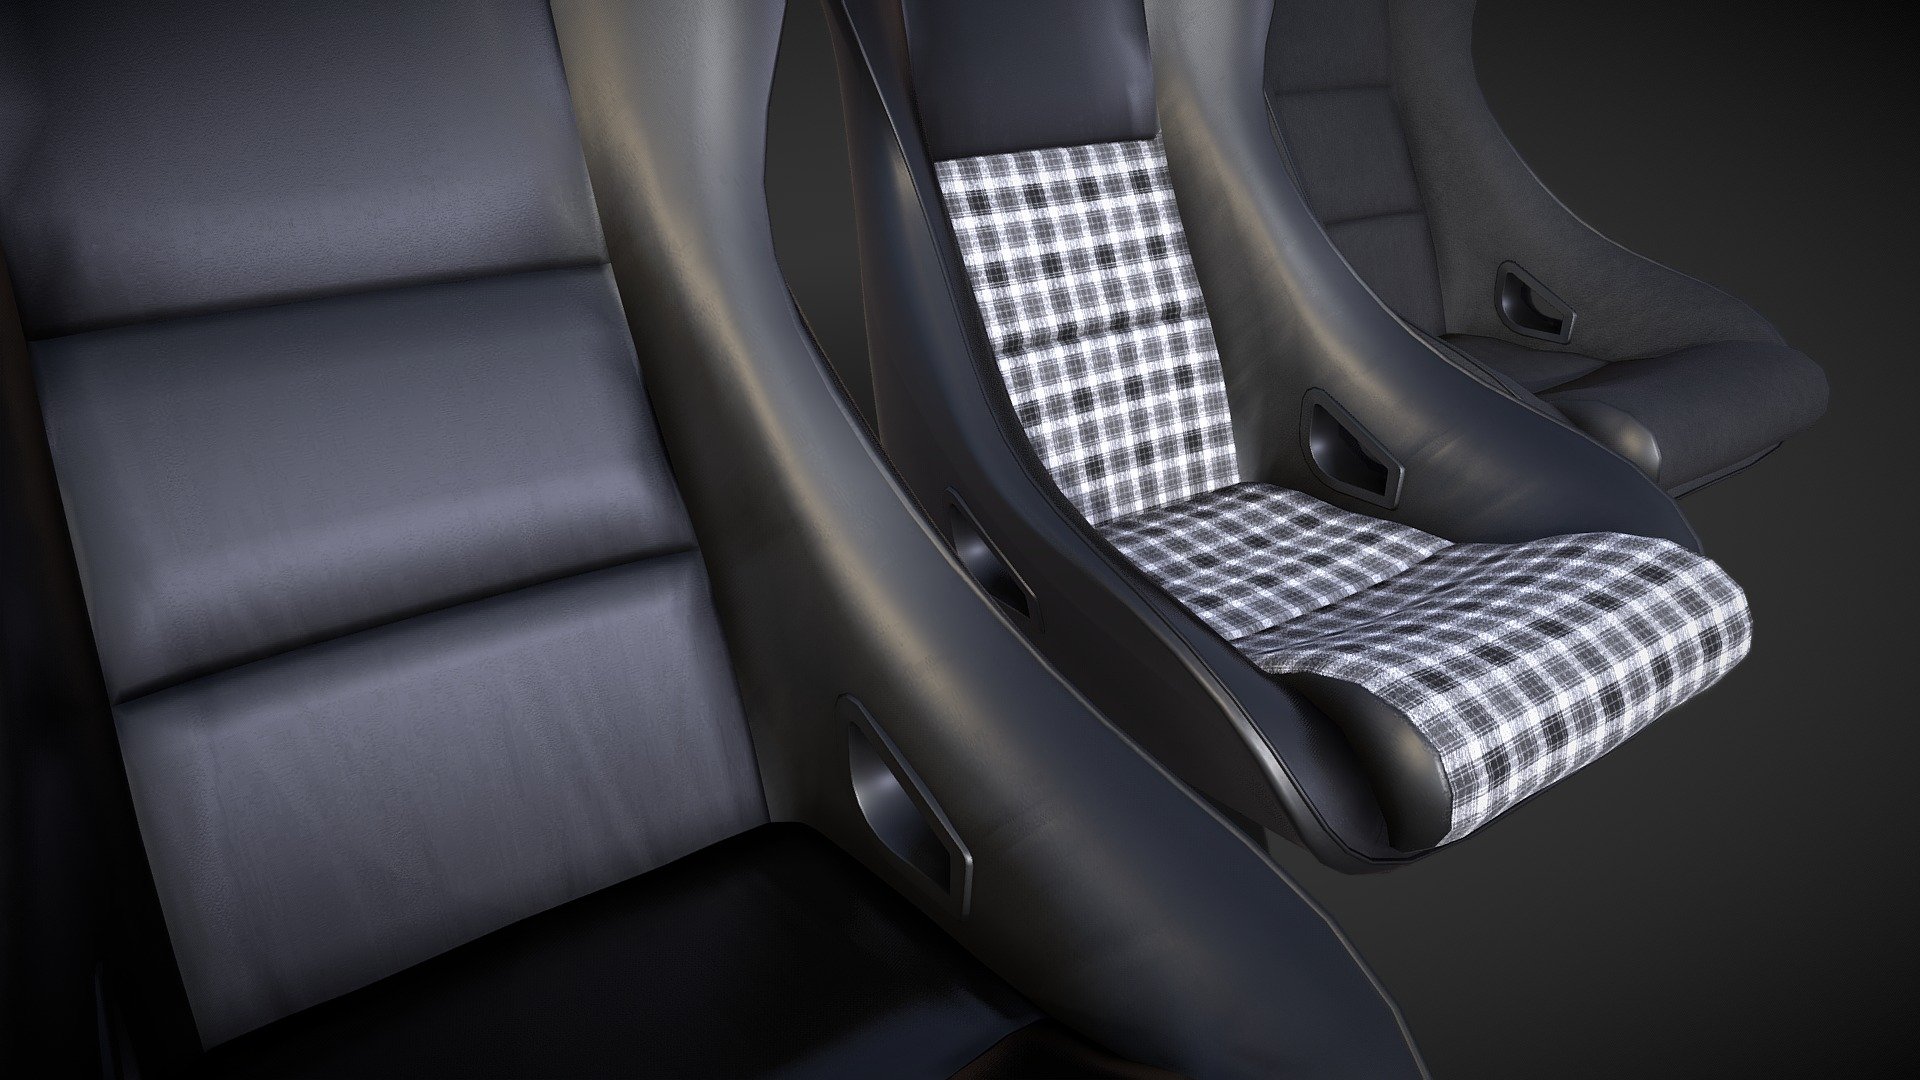 The GTS Classic sport seats I made for the 911SC model. You can of course use it universally where you want. Texture sets in leather, tartan and microfiber variants.
Midpoly, PBR, short animation to show the simple headrest rig 3d model